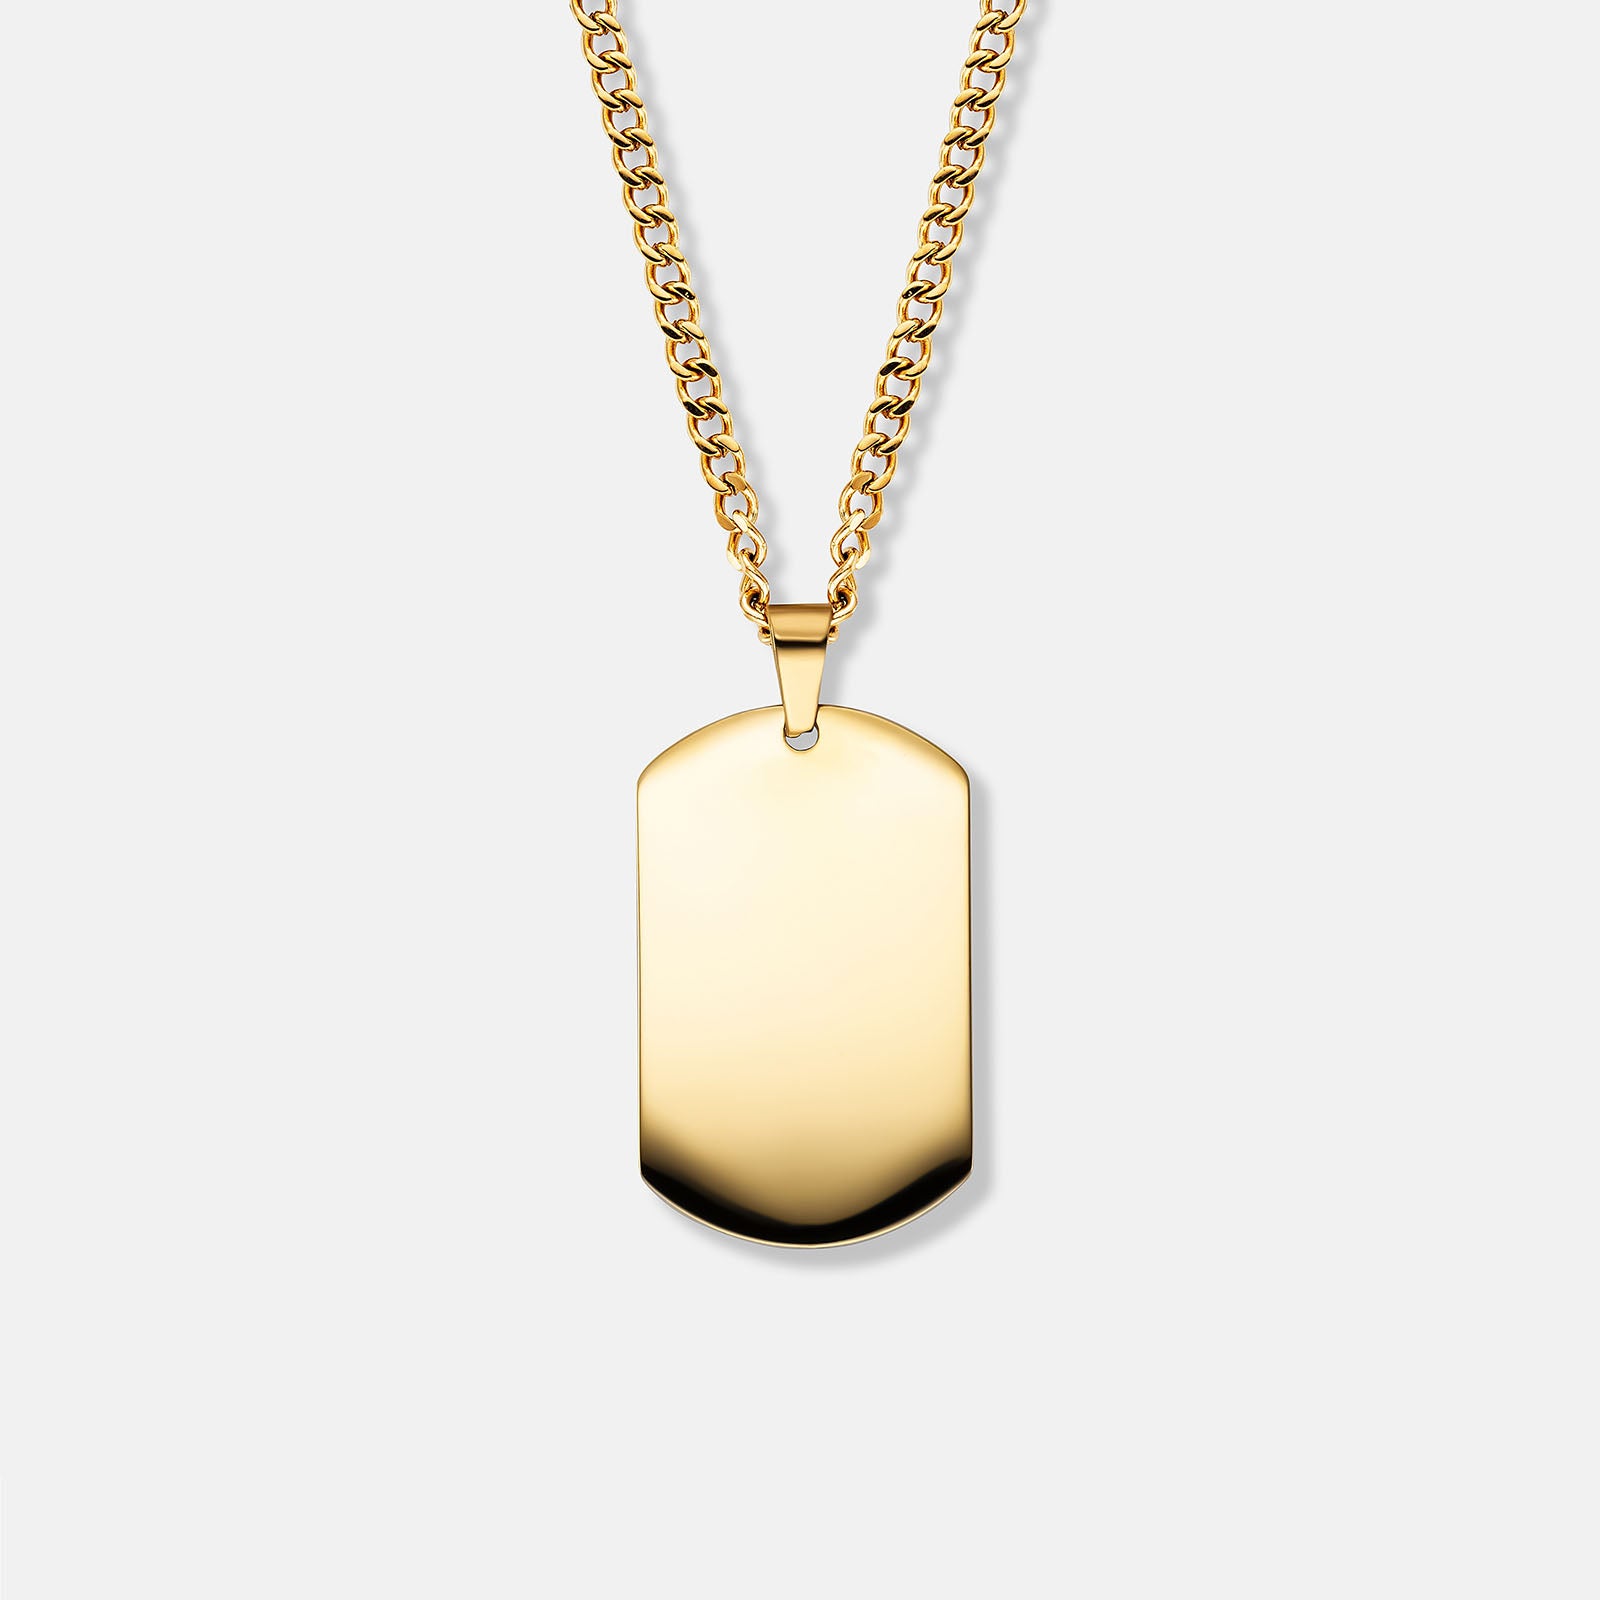 K12 - GOLD STEEL DOGTAG CHAIN